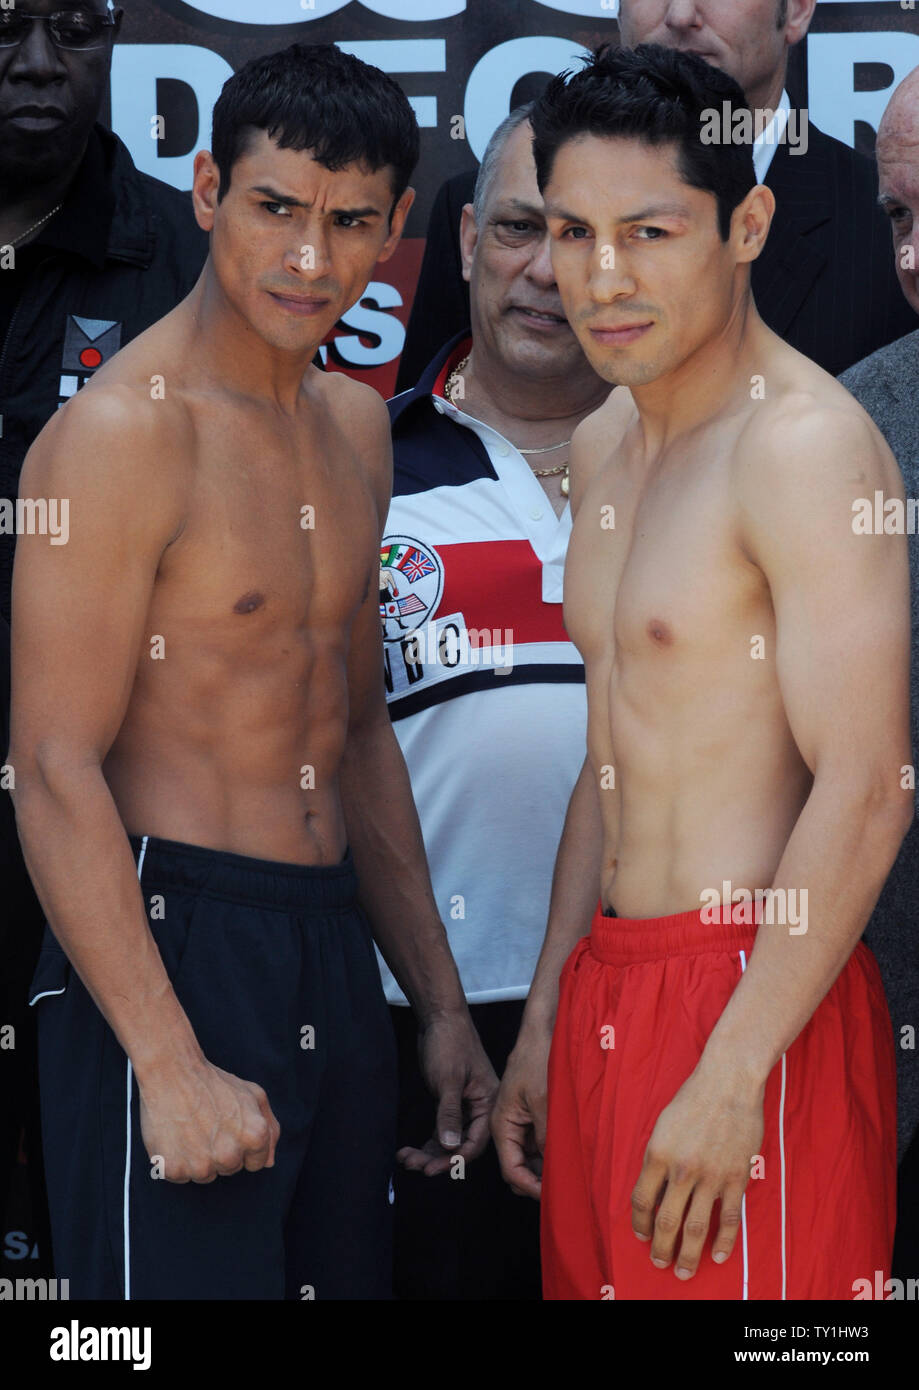 Rafael Marquez (L) and Israel Vazquez mug for the cameras after they each weighed in at 125 1/2 pounds for their fourth bout in Saturday's Showtime-televised non-title featherweight fight at Staples Center in Los Angeles on May 21, 2010.    UPI/Jim Ruymen Stock Photo